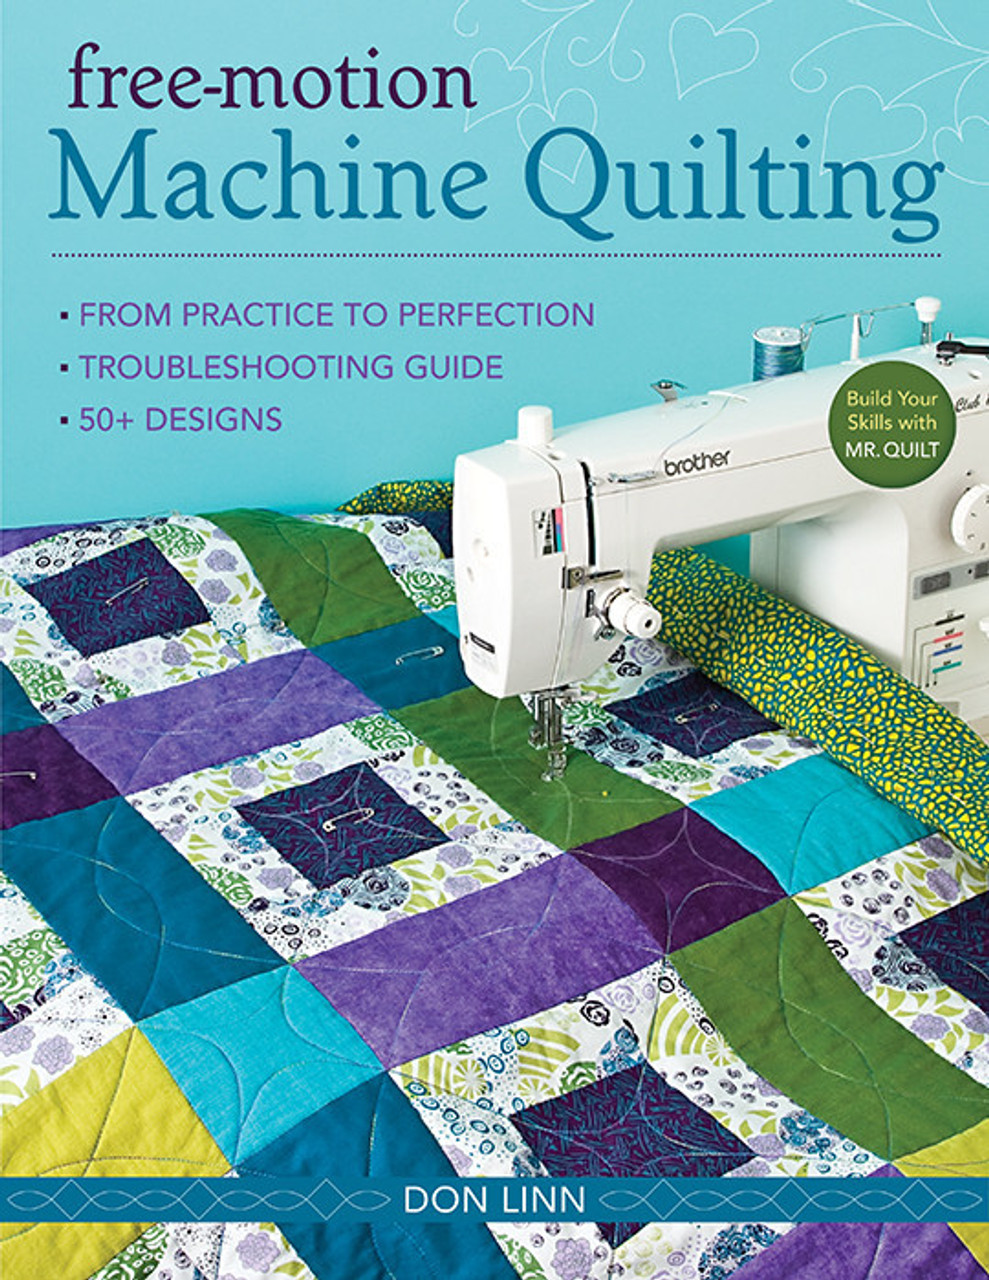 Five Tips to Make Free-Motion Quilting Easier - C&T Publishing